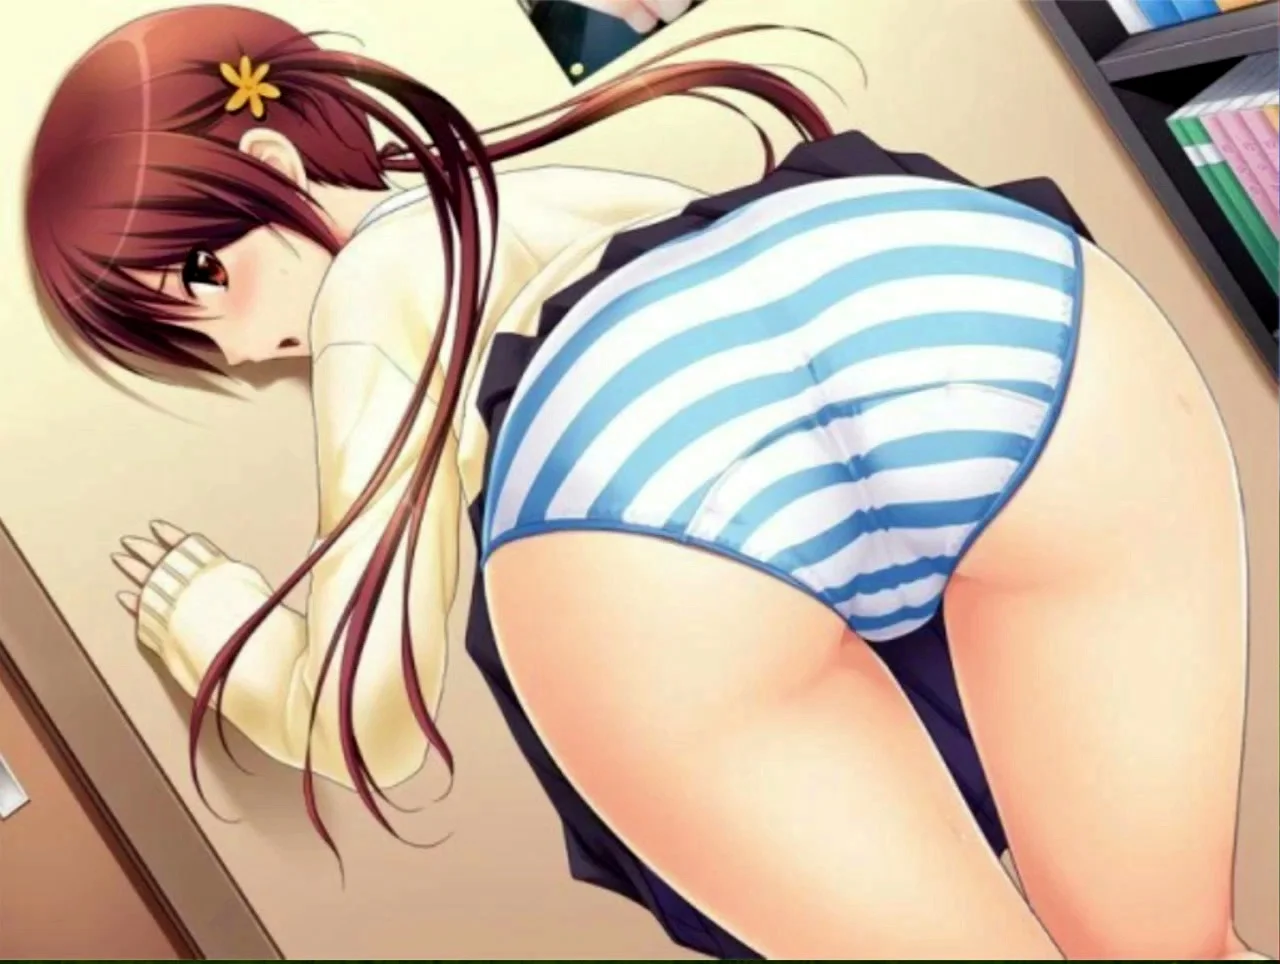 1280px x 964px - Anime farts and scat: striped panties fart - ThisVid.com